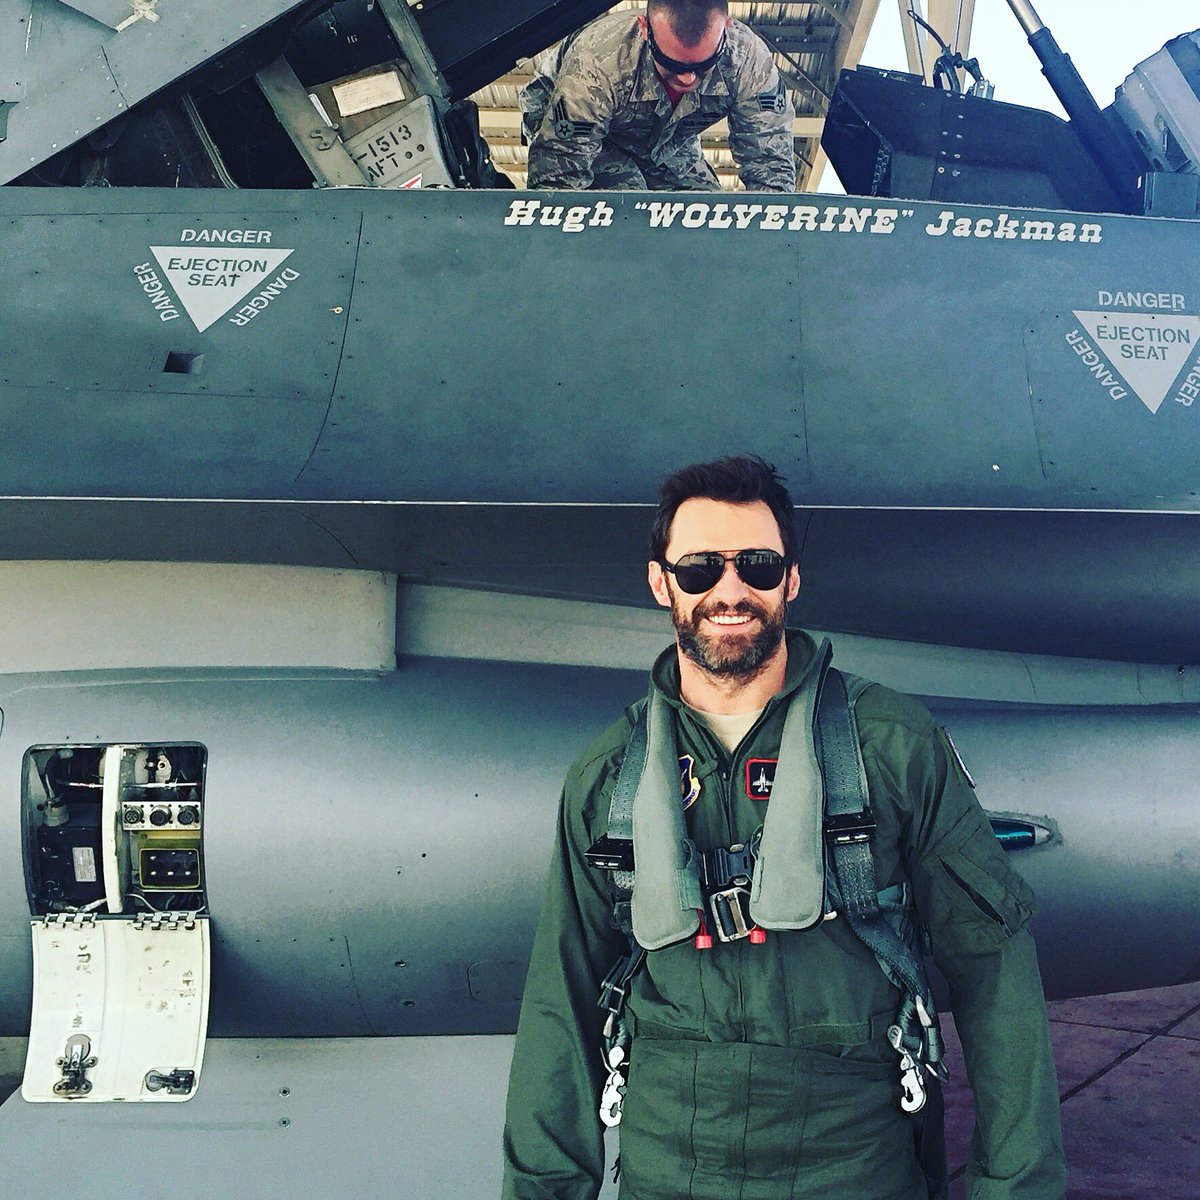 In honor of the 30th Anniversary of the move Top Gun and, of course, the all important #TBT - call sign WOLVERINE https://t.co/IiqDLSumHe